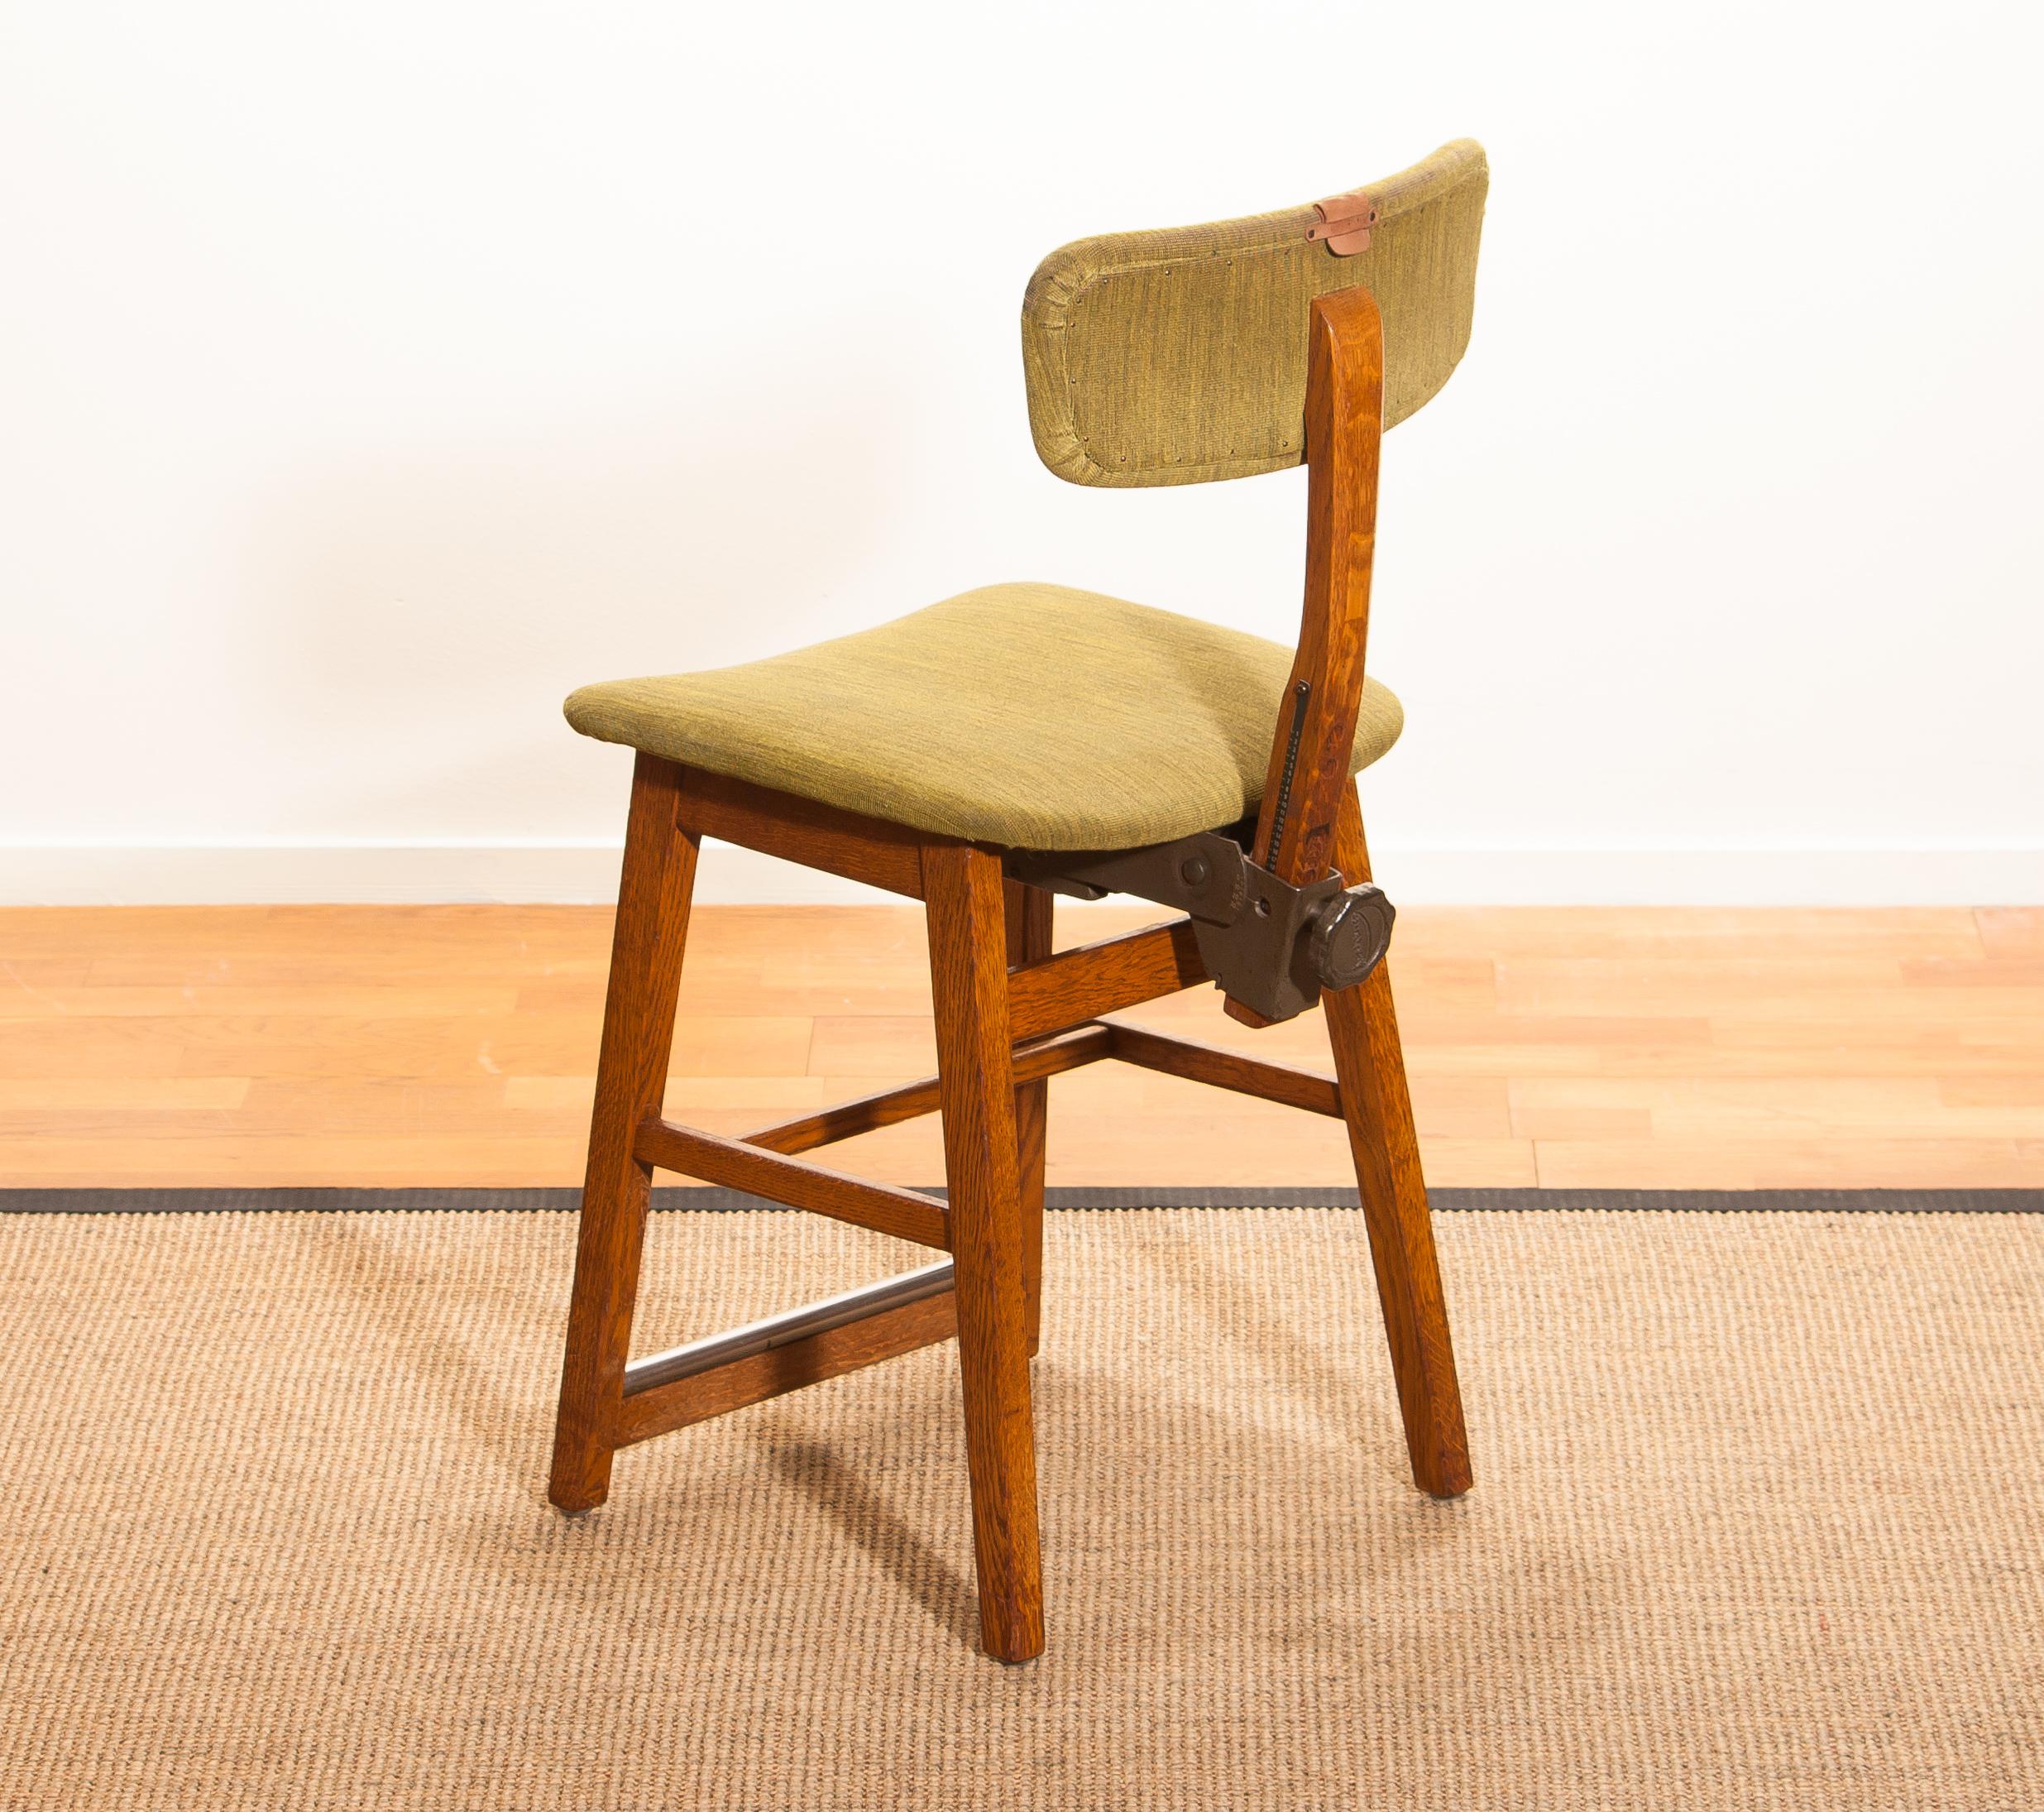 1960s, Teak and Wool Desk Chair by Âtvidabergs, Sweden 2